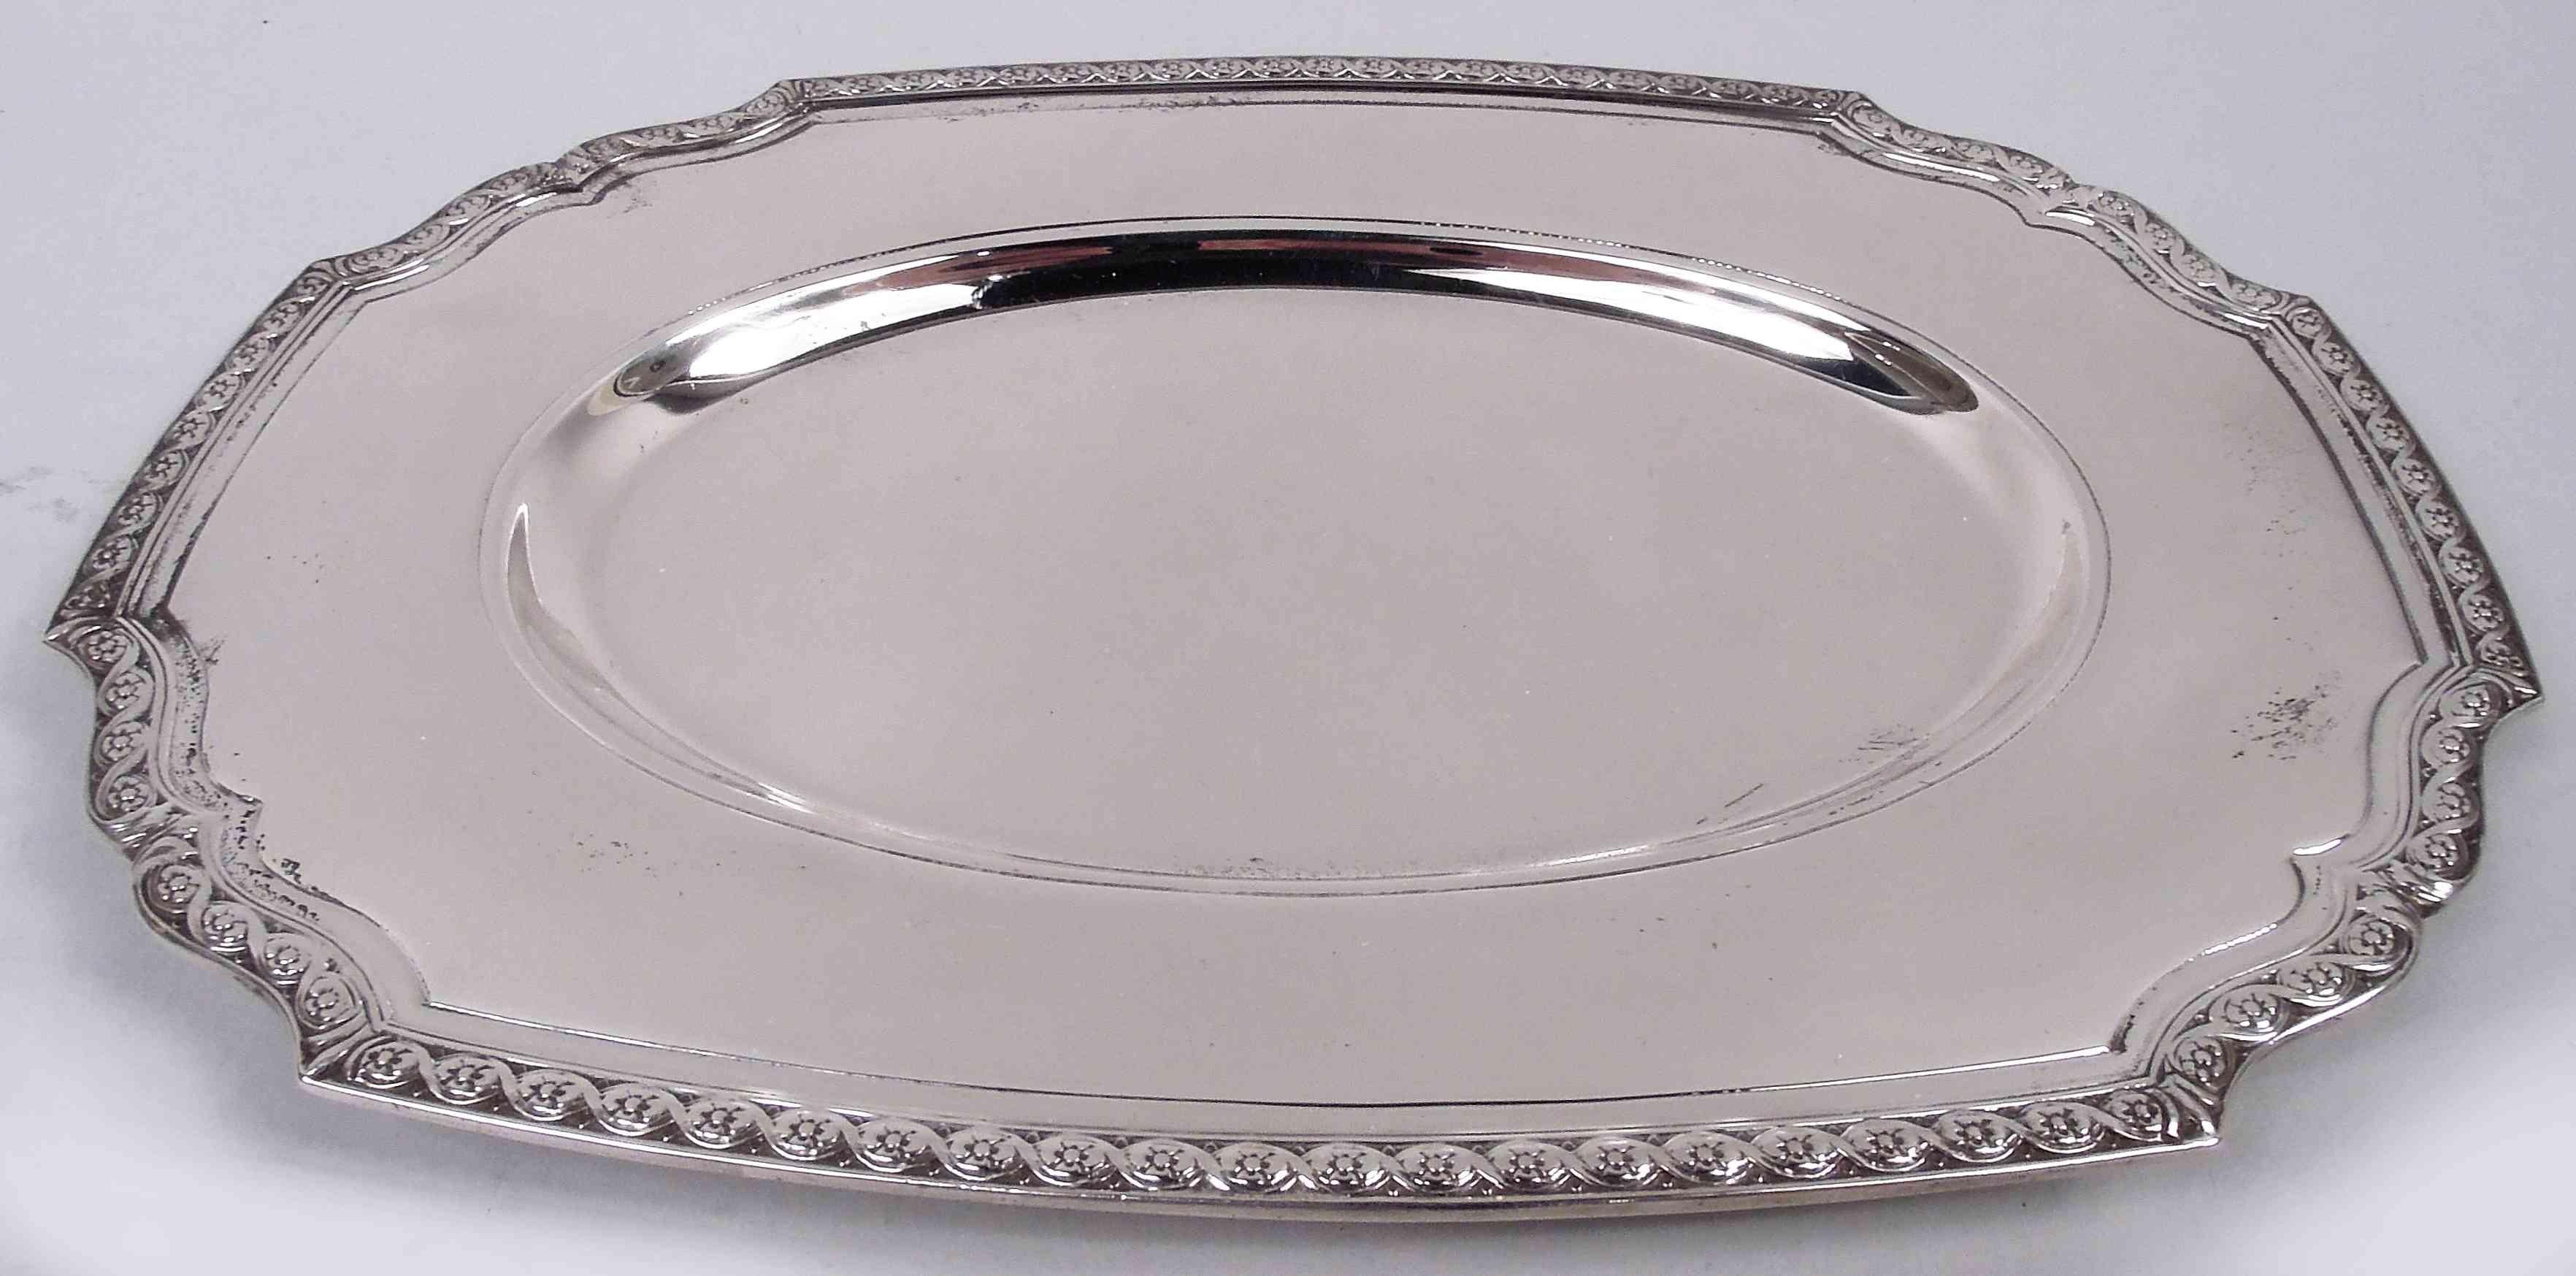 Tiffany Edwardian Classical Sterling Silver Gravy Boat on Stand For Sale 5